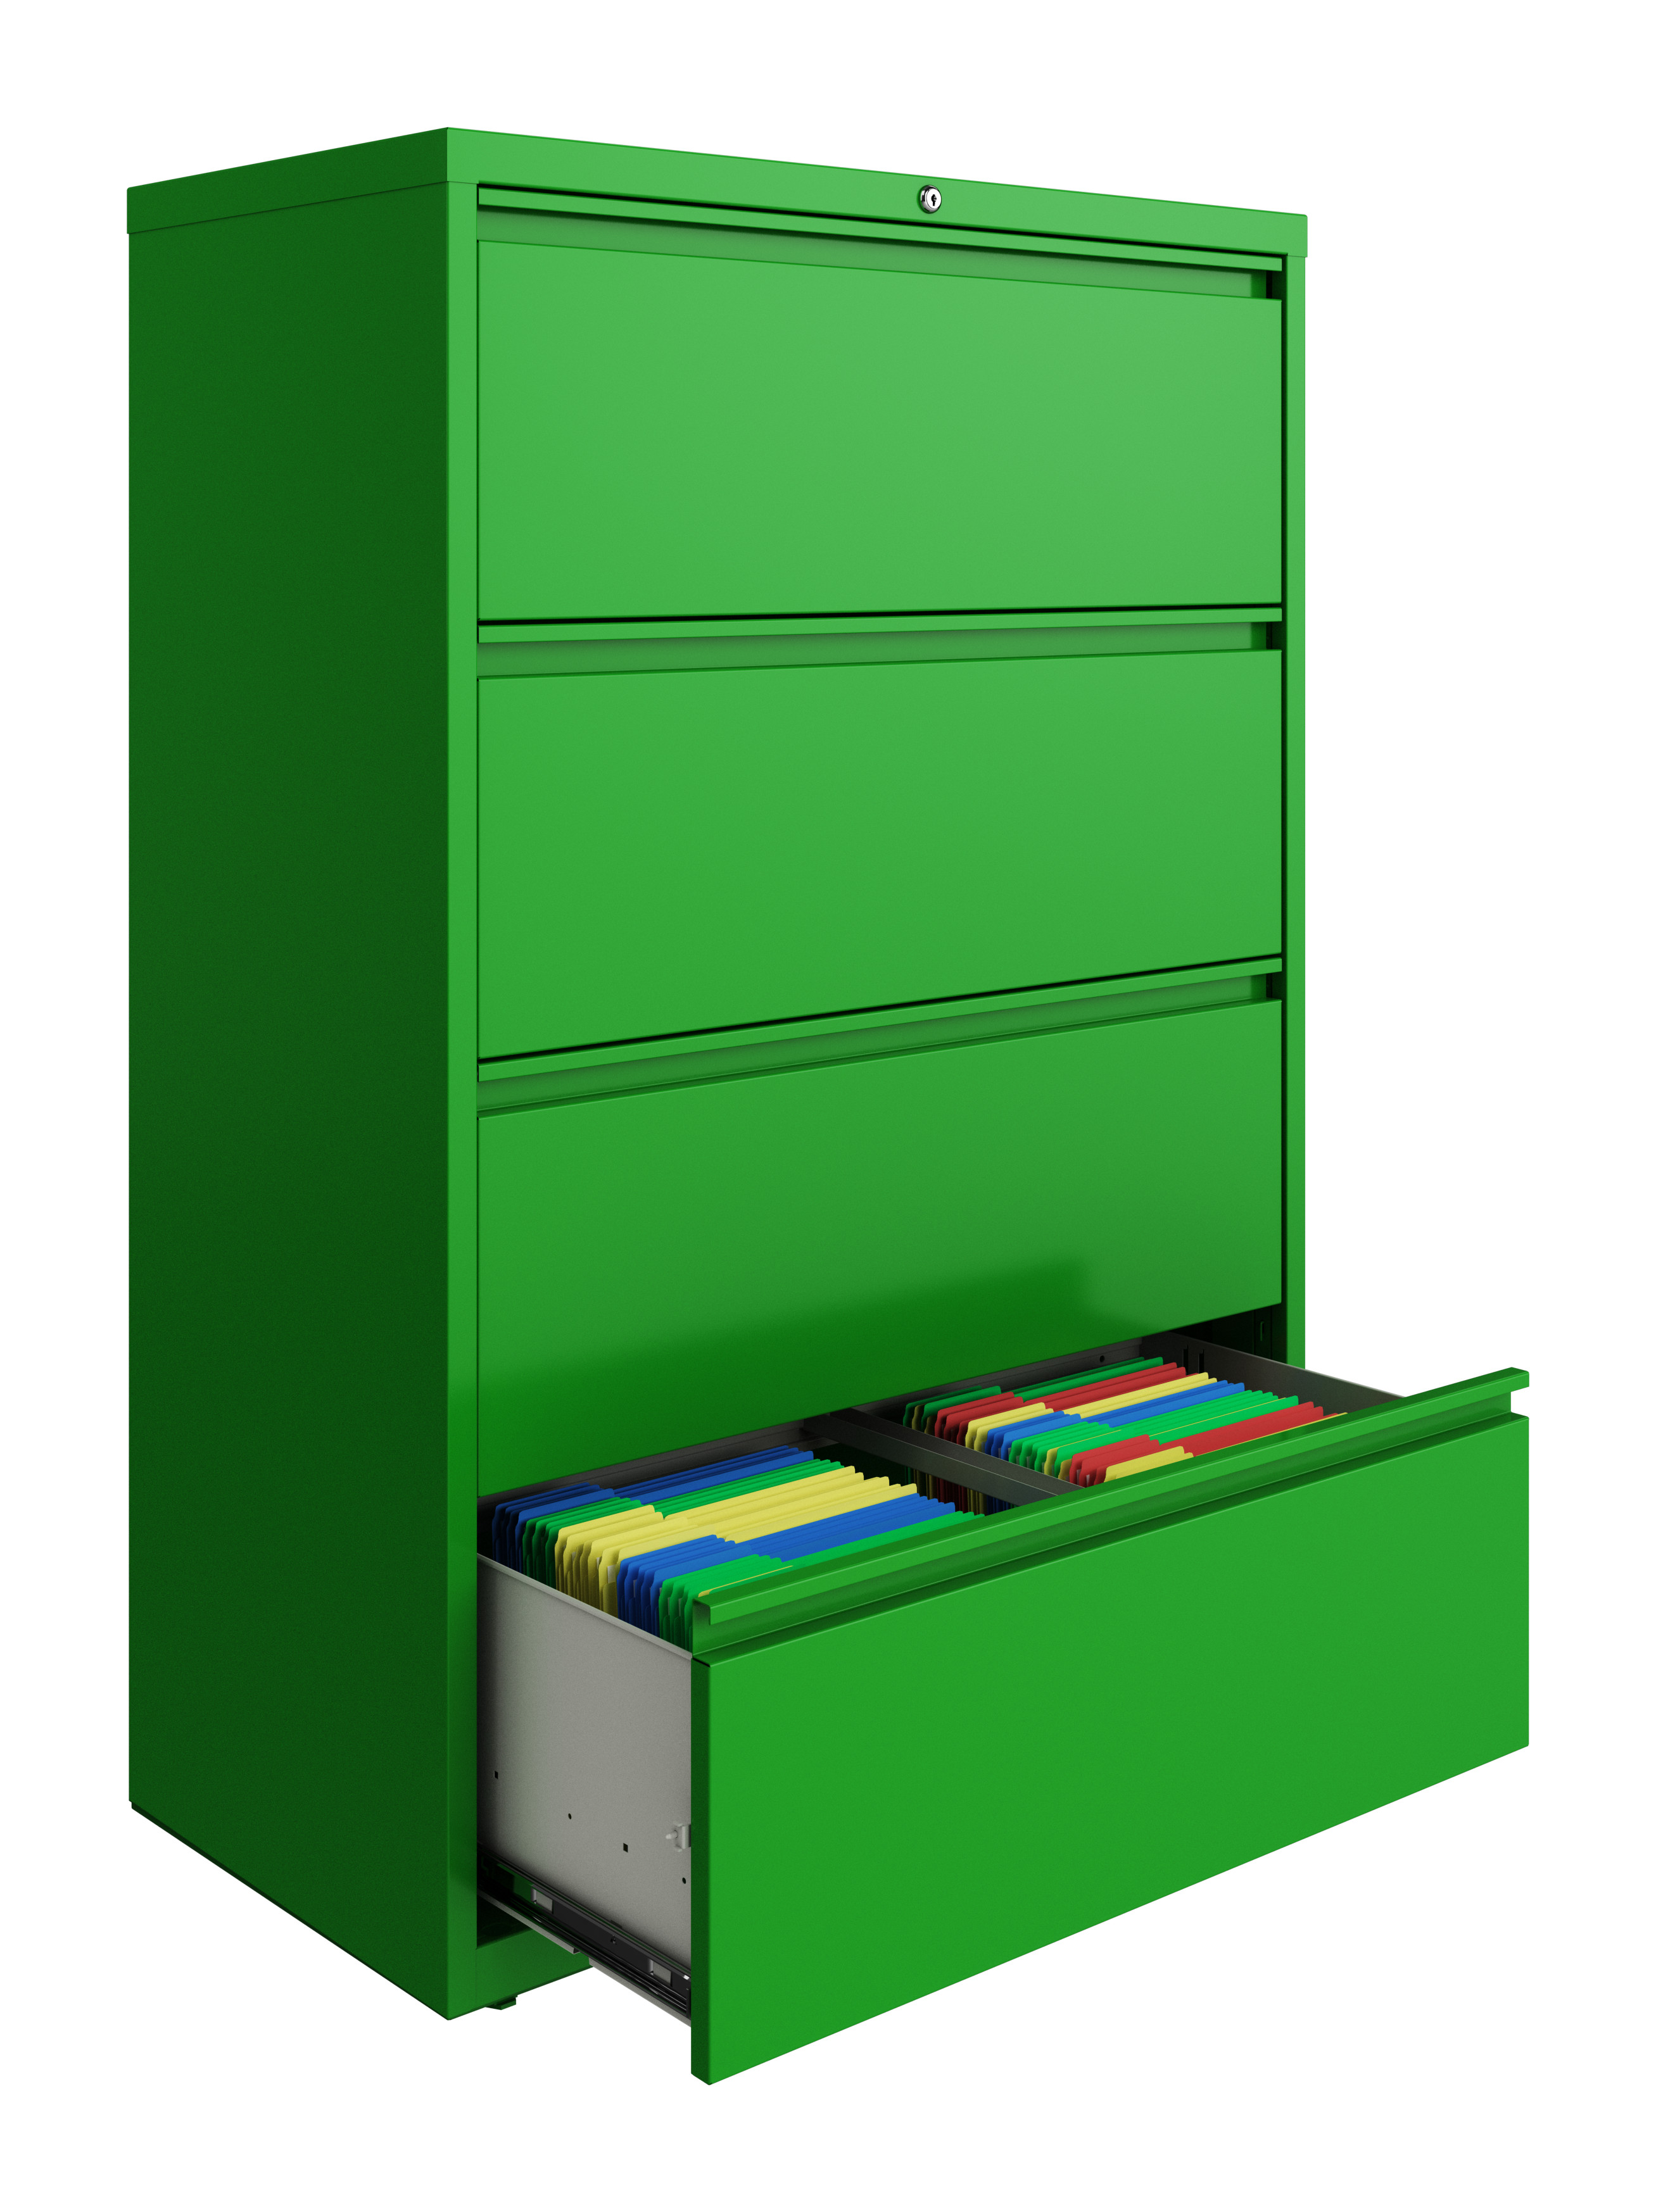 Hirsh 36 Inch Wide 4 Drawer Metal Lateral File Cabinet for Home and Office, Holds Letter, Legal and A4 Hanging Folders, Screamin' Green - image 4 of 5